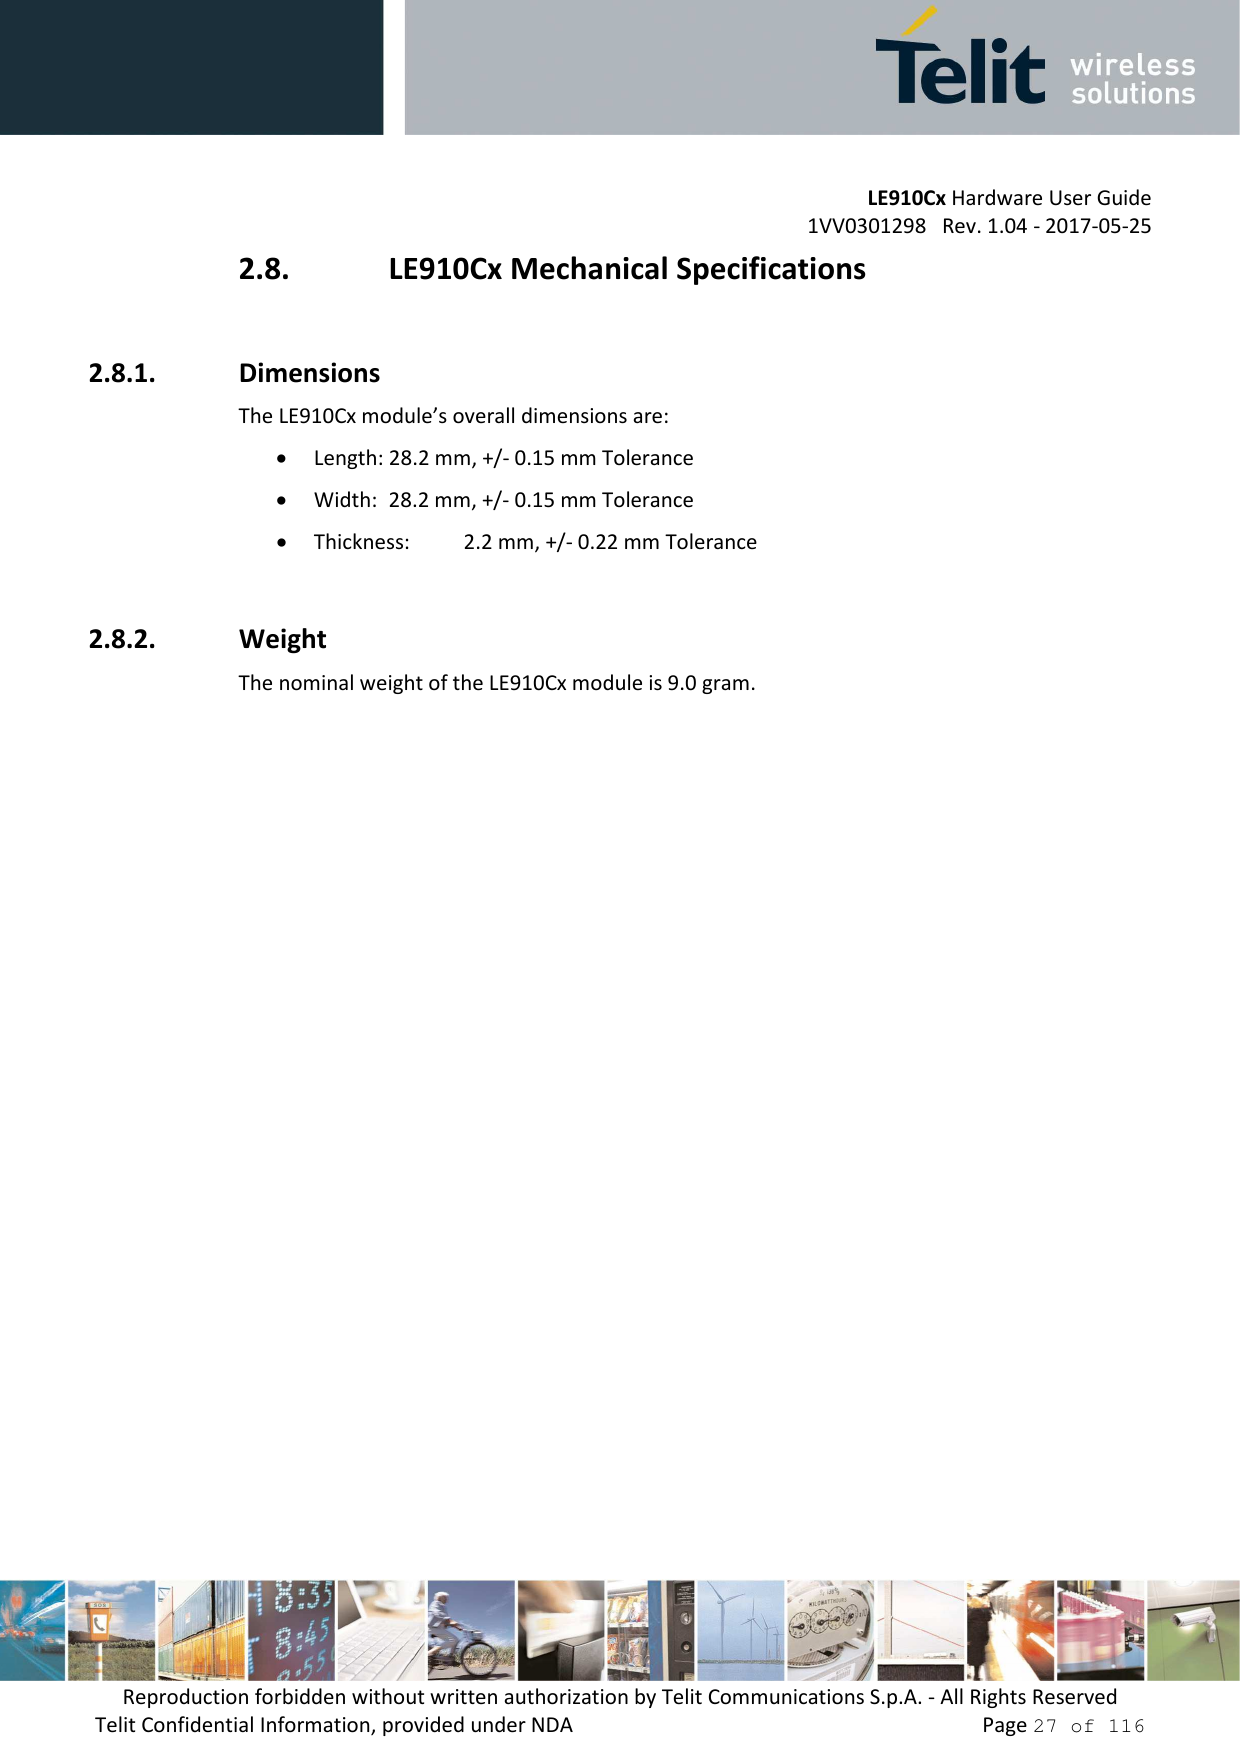         LE910Cx Hardware User Guide 1VV0301298   Rev. 1.04 - 2017-05-25 Reproduction forbidden without written authorization by Telit Communications S.p.A. - All Rights Reserved Telit Confidential Information, provided under NDA                 Page 27 of 116 2.8. LE910Cx Mechanical Specifications  2.8.1. Dimensions The LE910Cx module’s overall dimensions are:  • Length: 28.2 mm, +/- 0.15 mm Tolerance • Width:  28.2 mm, +/- 0.15 mm Tolerance • Thickness:   2.2 mm, +/- 0.22 mm Tolerance  2.8.2. Weight The nominal weight of the LE910Cx module is 9.0 gram. 